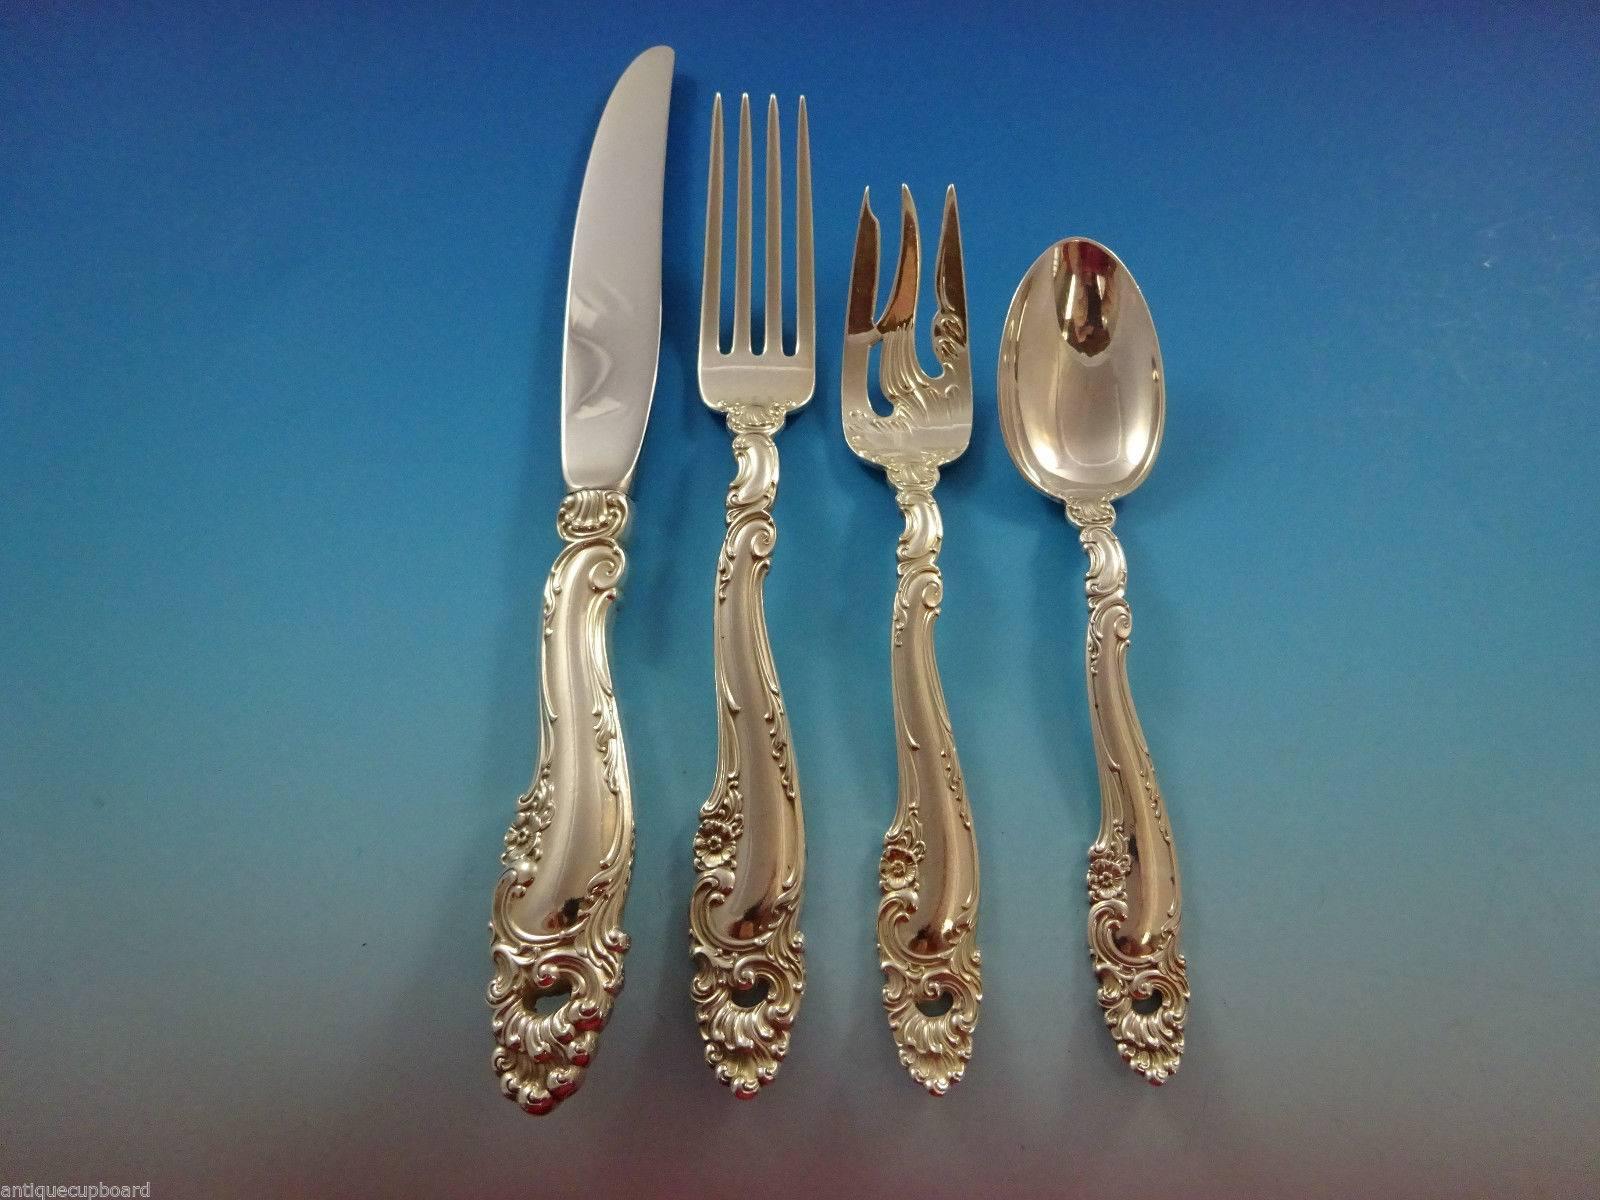 Decor by Gorham sterling silver flatware set - 36 Pieces. This set includes: 

Eight knives, 9